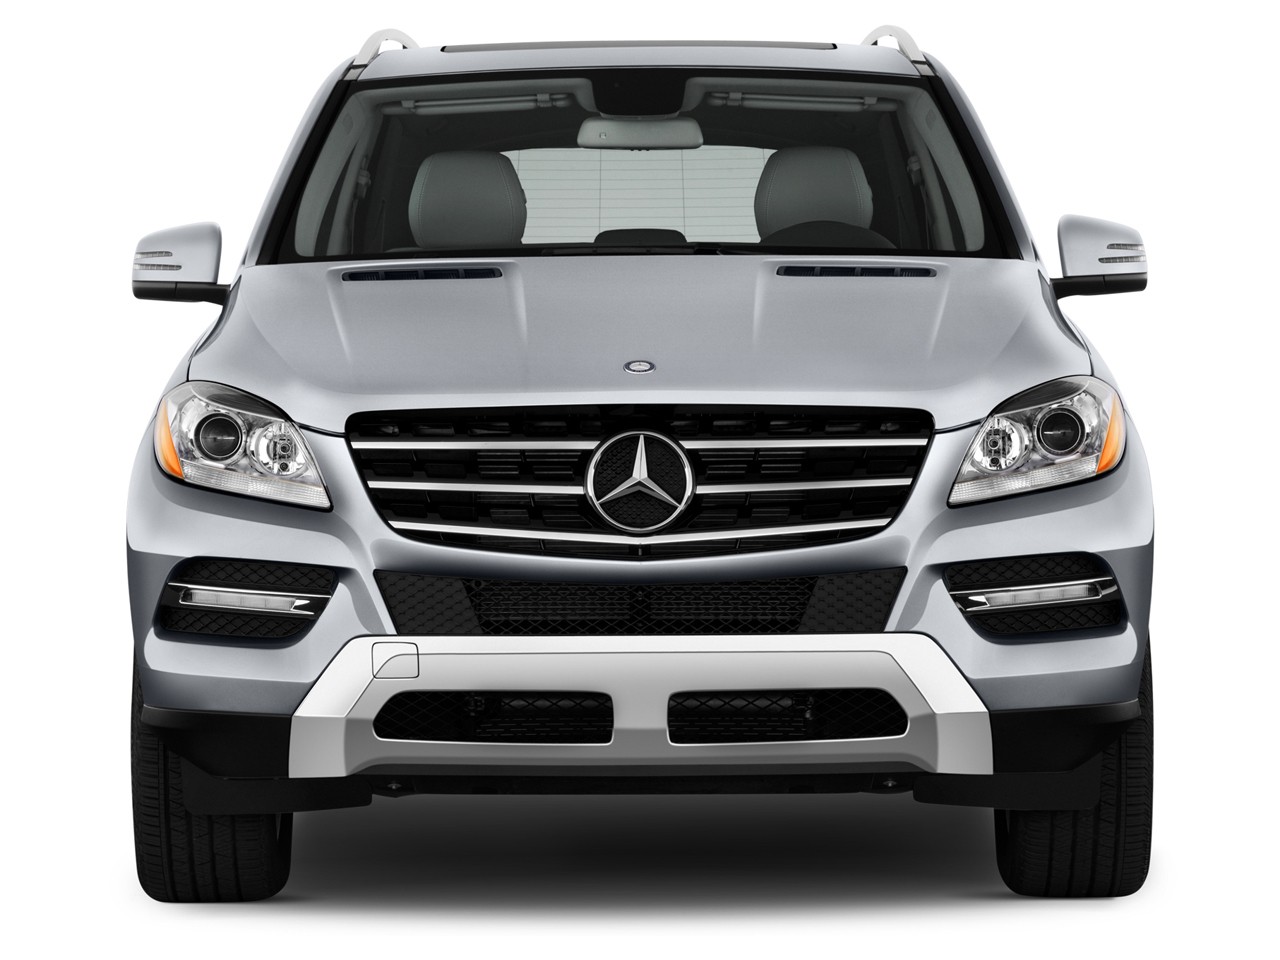 Mercedes ML350 2012 Review  CarsGuide